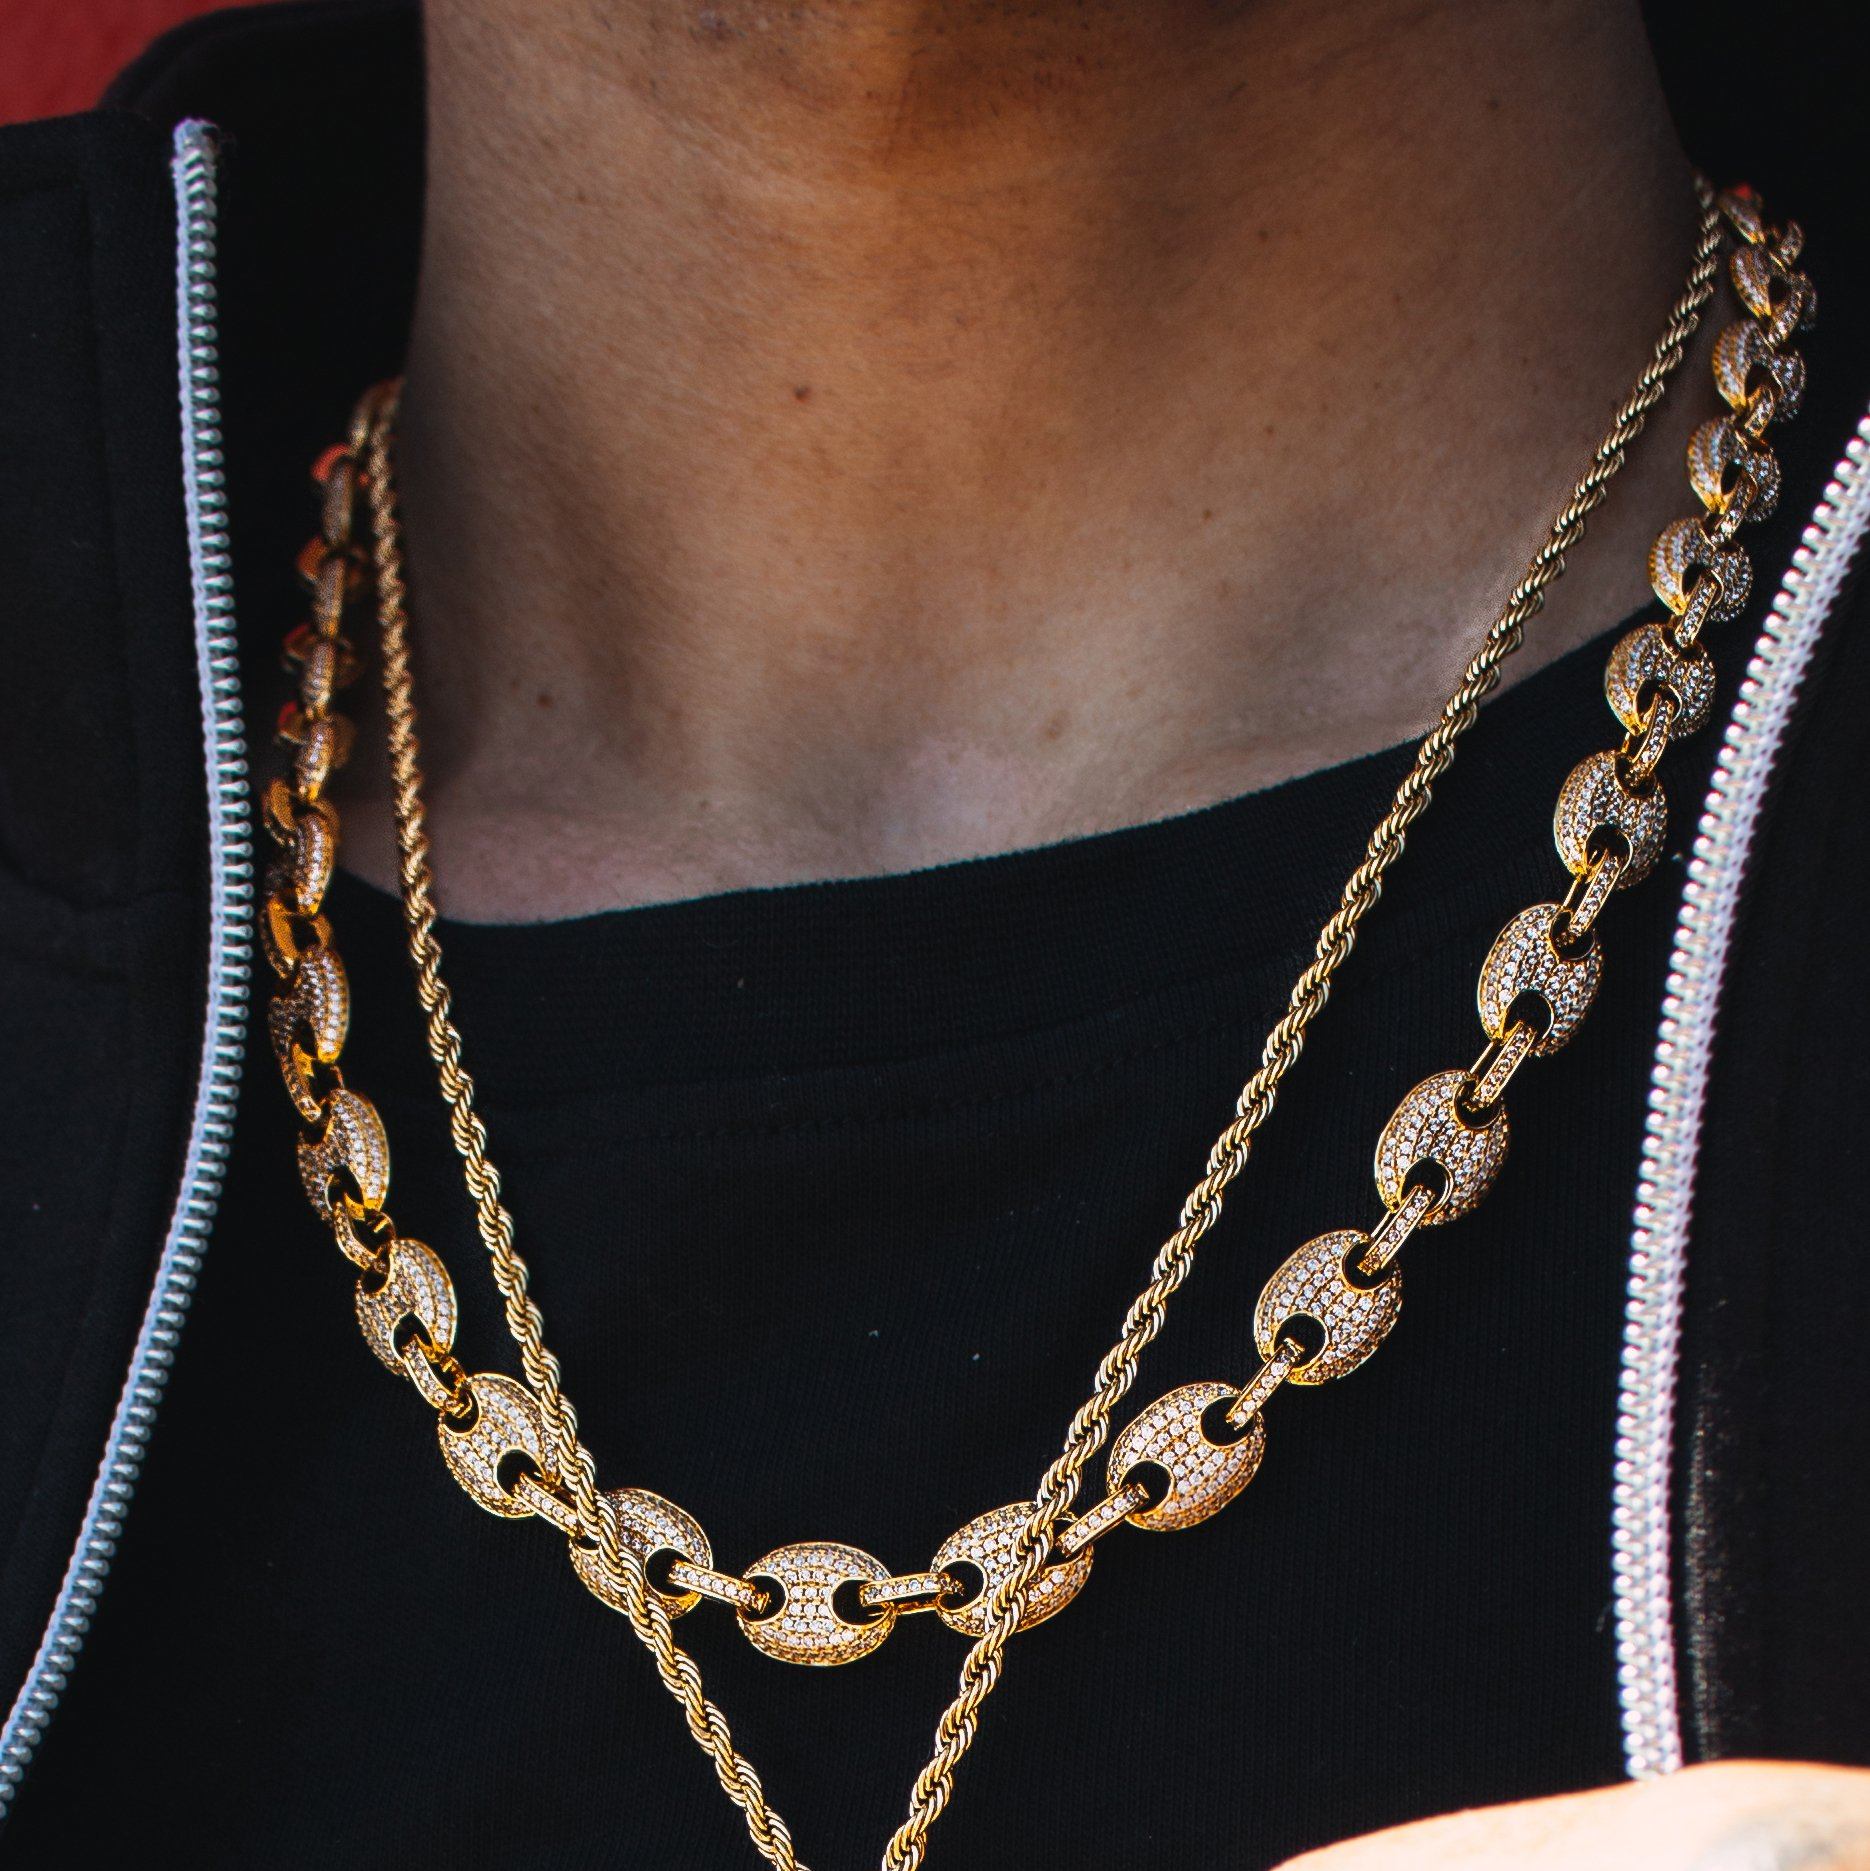 Diamond Gucci Link Chain in Gold *NEW* - The Gold Gods